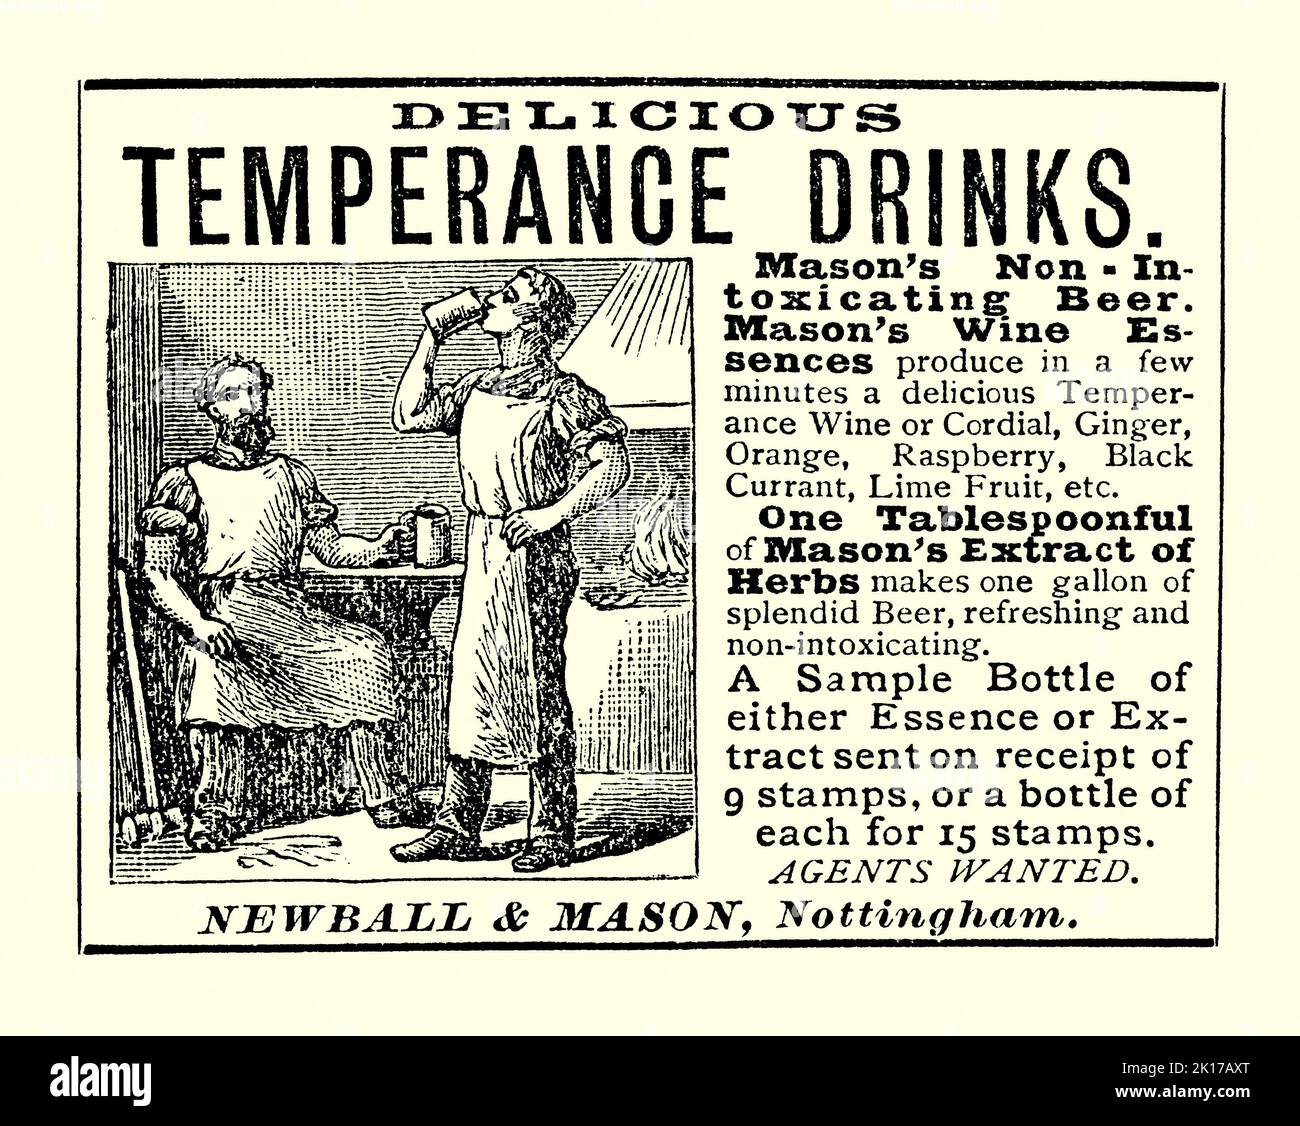 An old Victorian advert for temperance drinks, made by Newball and Mason of Nottingham, Nottinghamshire, England, UK. It is from a magazine of 1890. The drinks made include fruit cordials and ‘wines’, plus herb extracts to create a non-intoxicating ‘beer’. The illustration shows tow workers enjoying a drink in a forge. They are wearing heavy leather aprons. The temperance movement is a social movement promoting temperance or complete abstinence from consuming alcoholic beverages. The movement promotes teetotalism, emphasising alcohol’s negative effects on people's lives – old 1800s graphics. Stock Photo